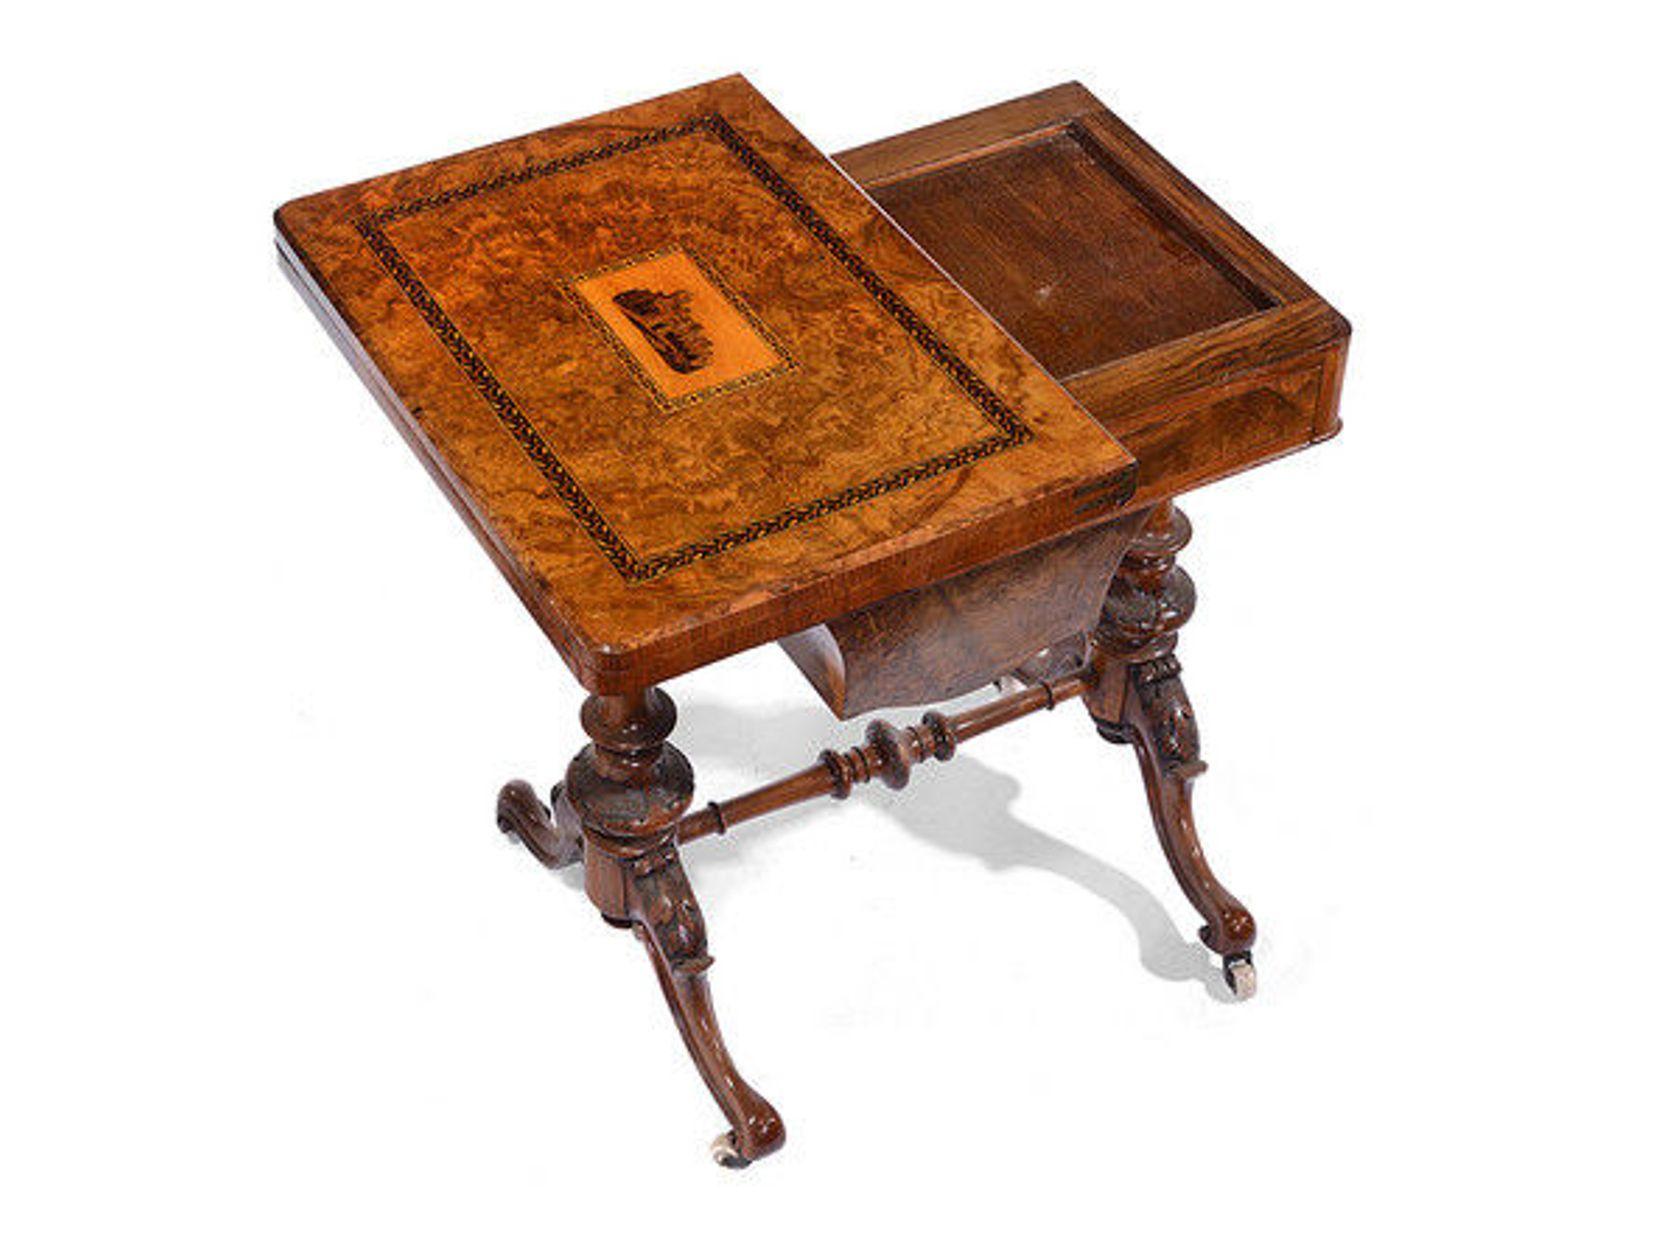 A late 19th century Victorian walnut and inlaid games and work table.

The burr walnut top, with a central inset Tunbridge ware plaque depicting a cathedral surrounded by ebony and satinwood banding and with a folding swivel top that opens out to